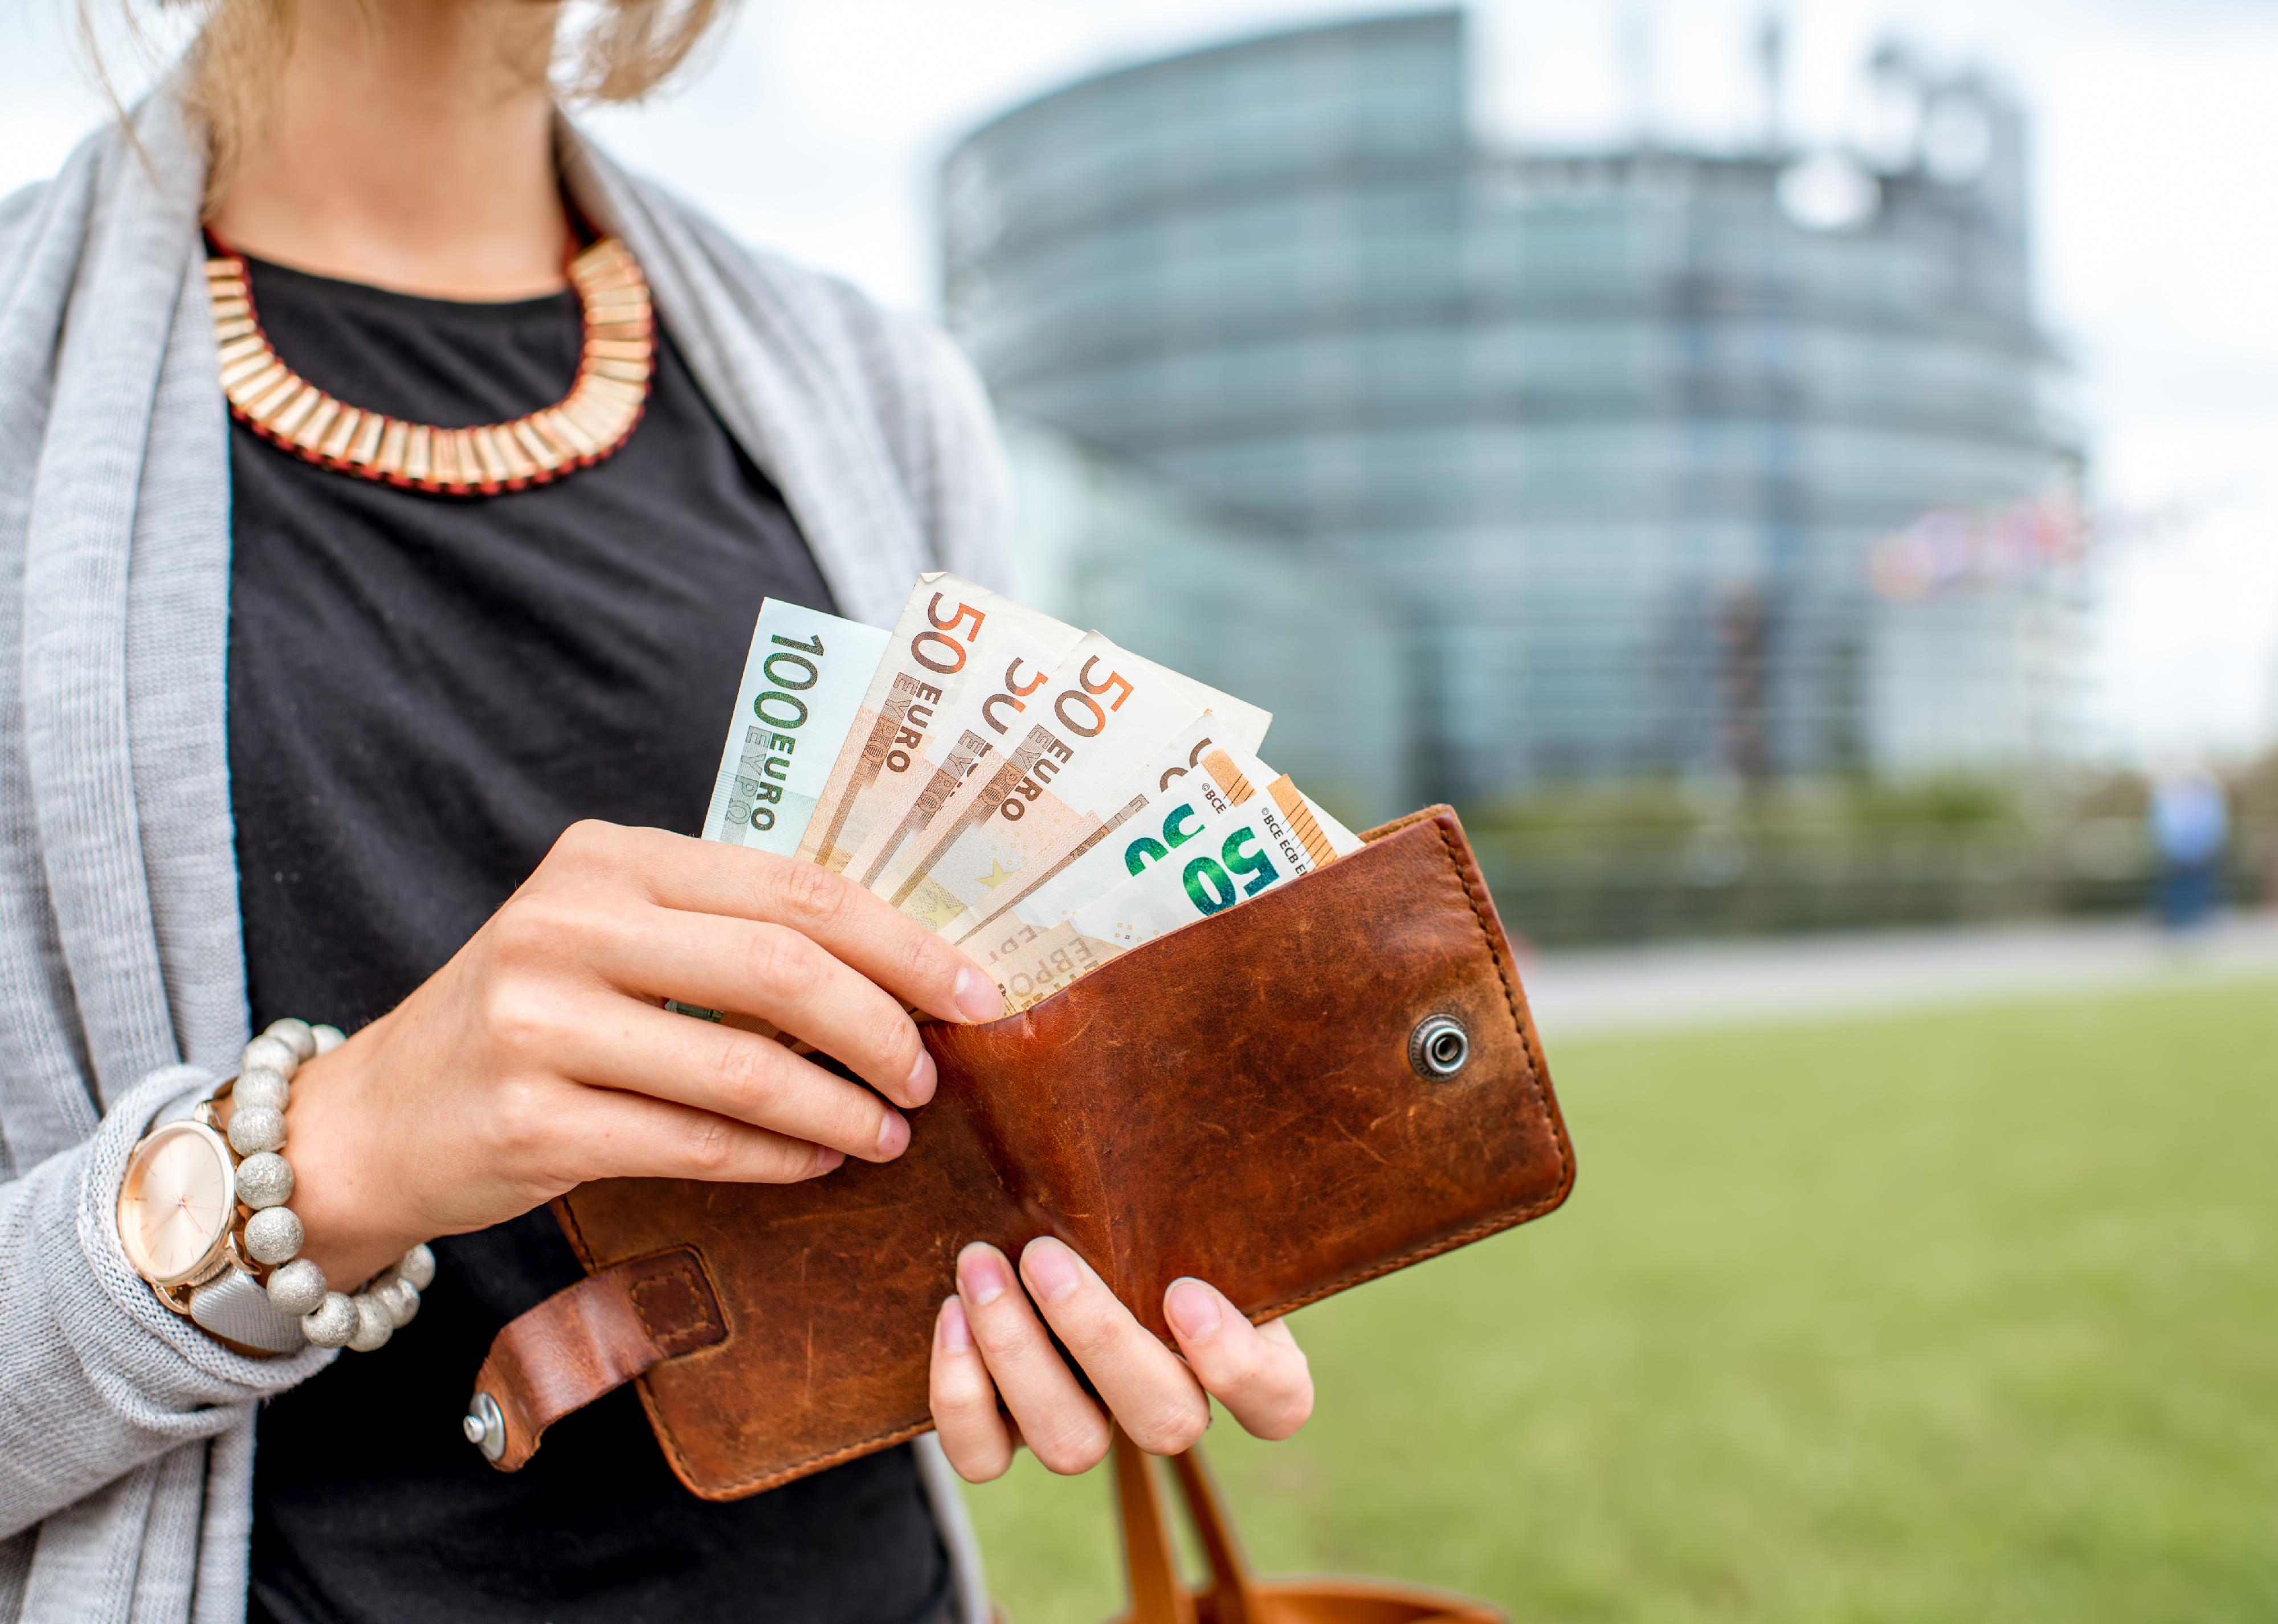 Close-up view of two hands holding open wallet with Euros